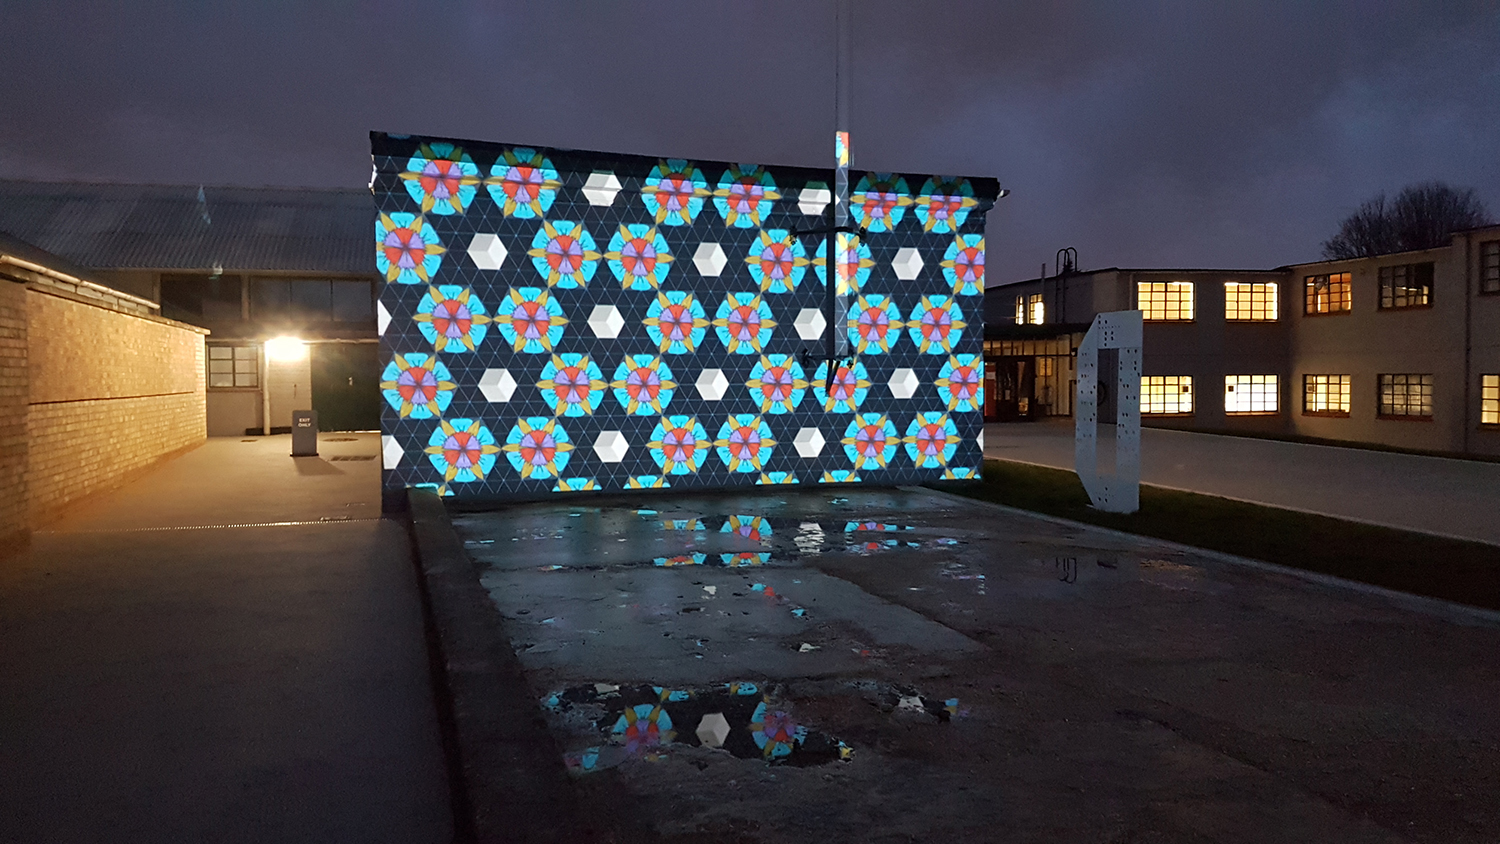 Installation view: Between the Stars, Bletchley Park, 2020. Photo: Pete Cleary.